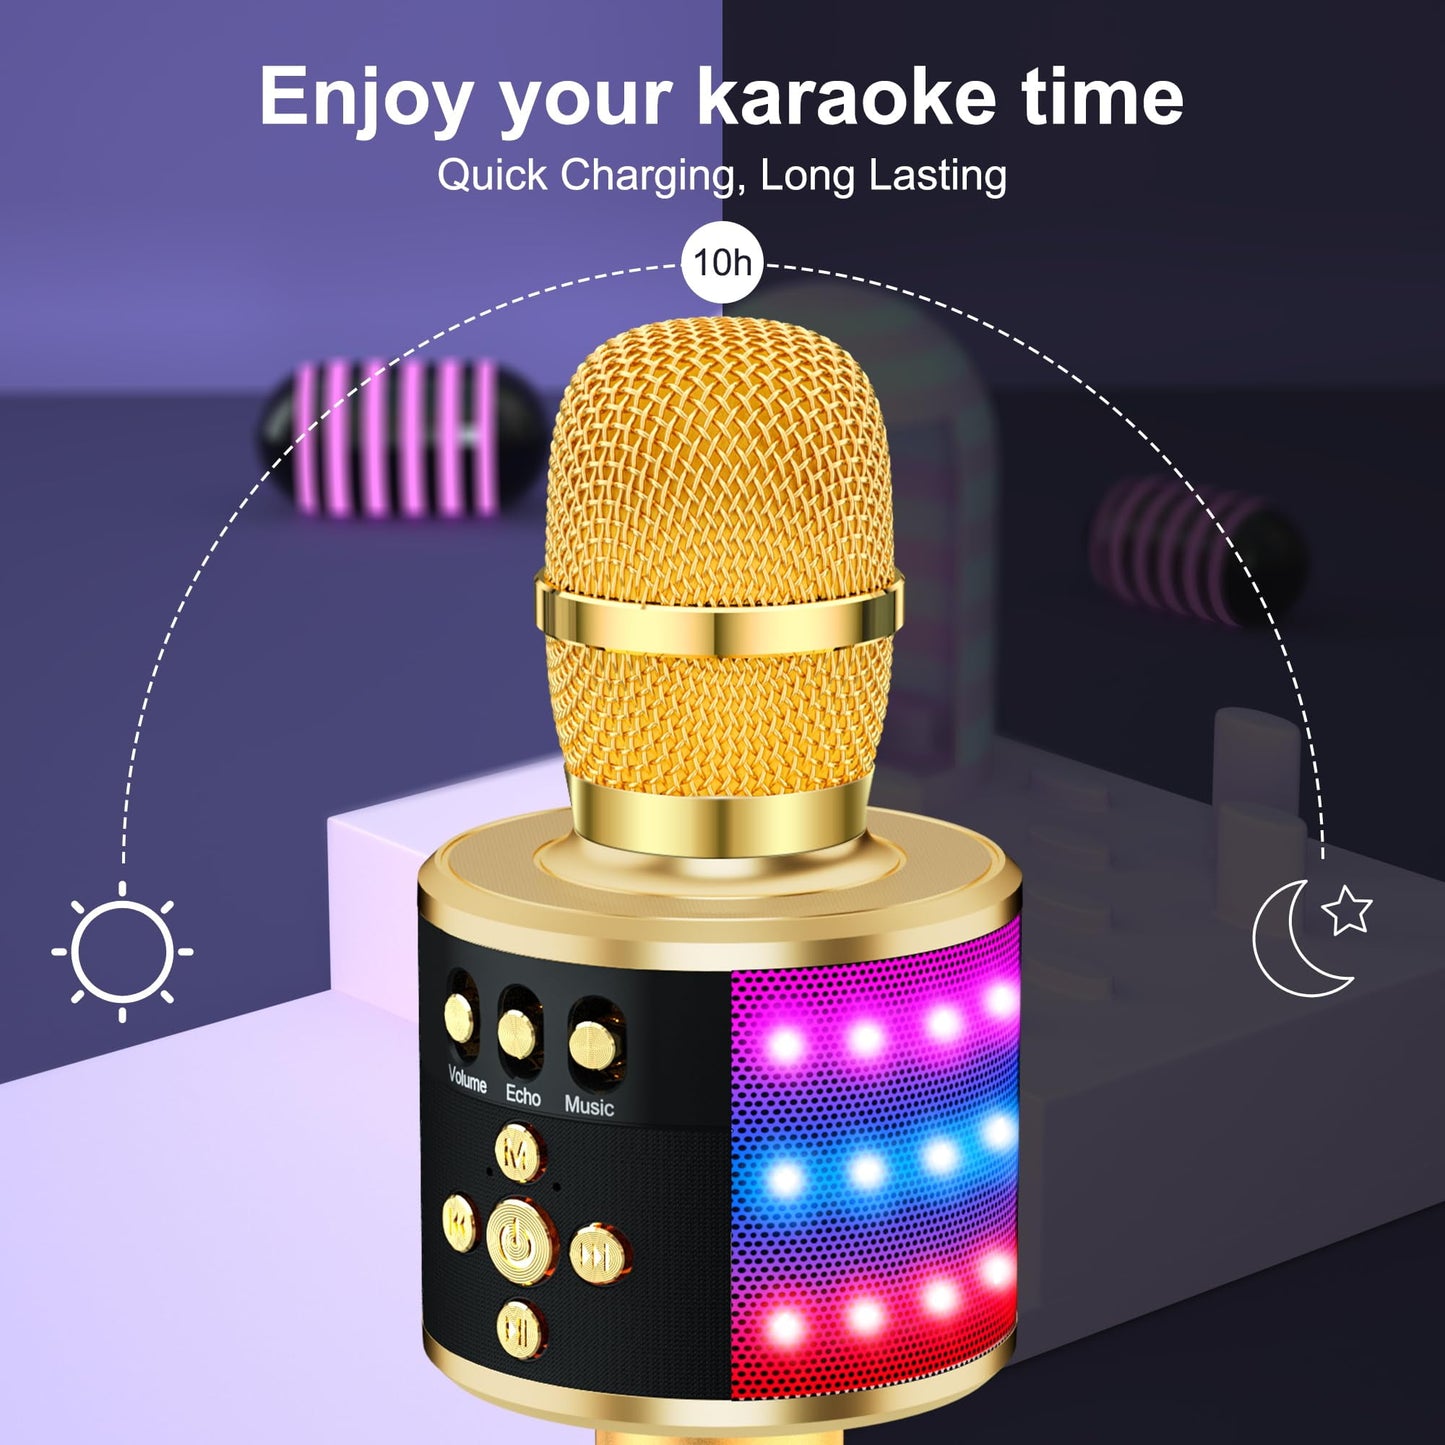 BONAOK Bluetooth Wireless Karaoke Microphone with LED Lights,4-in-1 Portable Handheld Mic with Speaker Karaoke Player for Singing Home Party Toys Birthday Gift for Kids Adults Q78(Rose Gold)